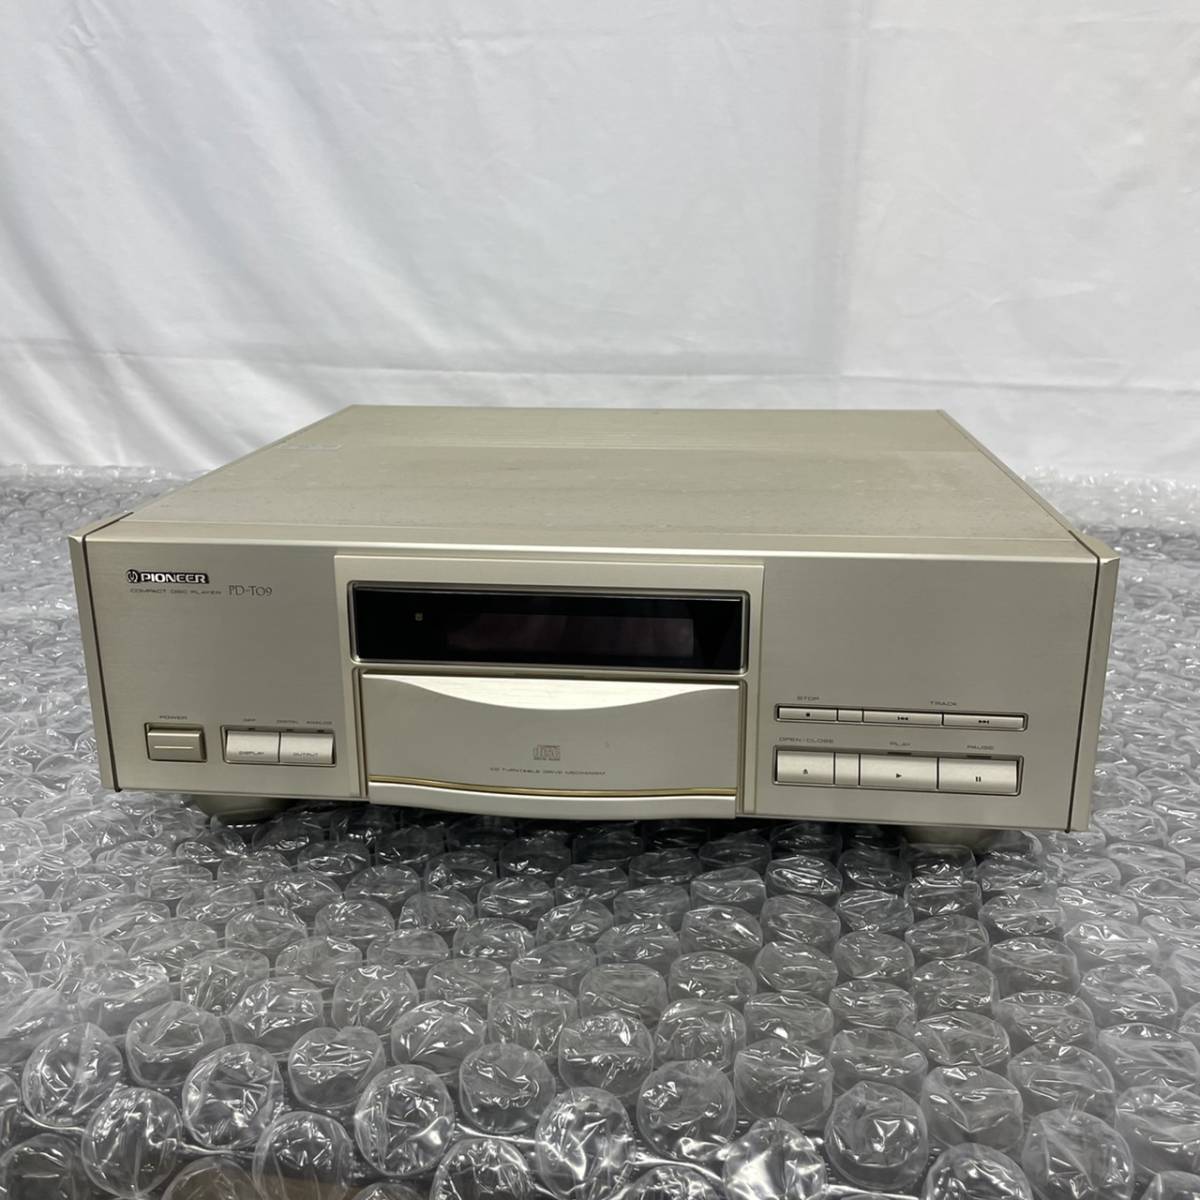 J11821(055)-601/SY90000【名古屋】PIONEER パイオニア PD-TO9 COMPACT DISC PLAYER